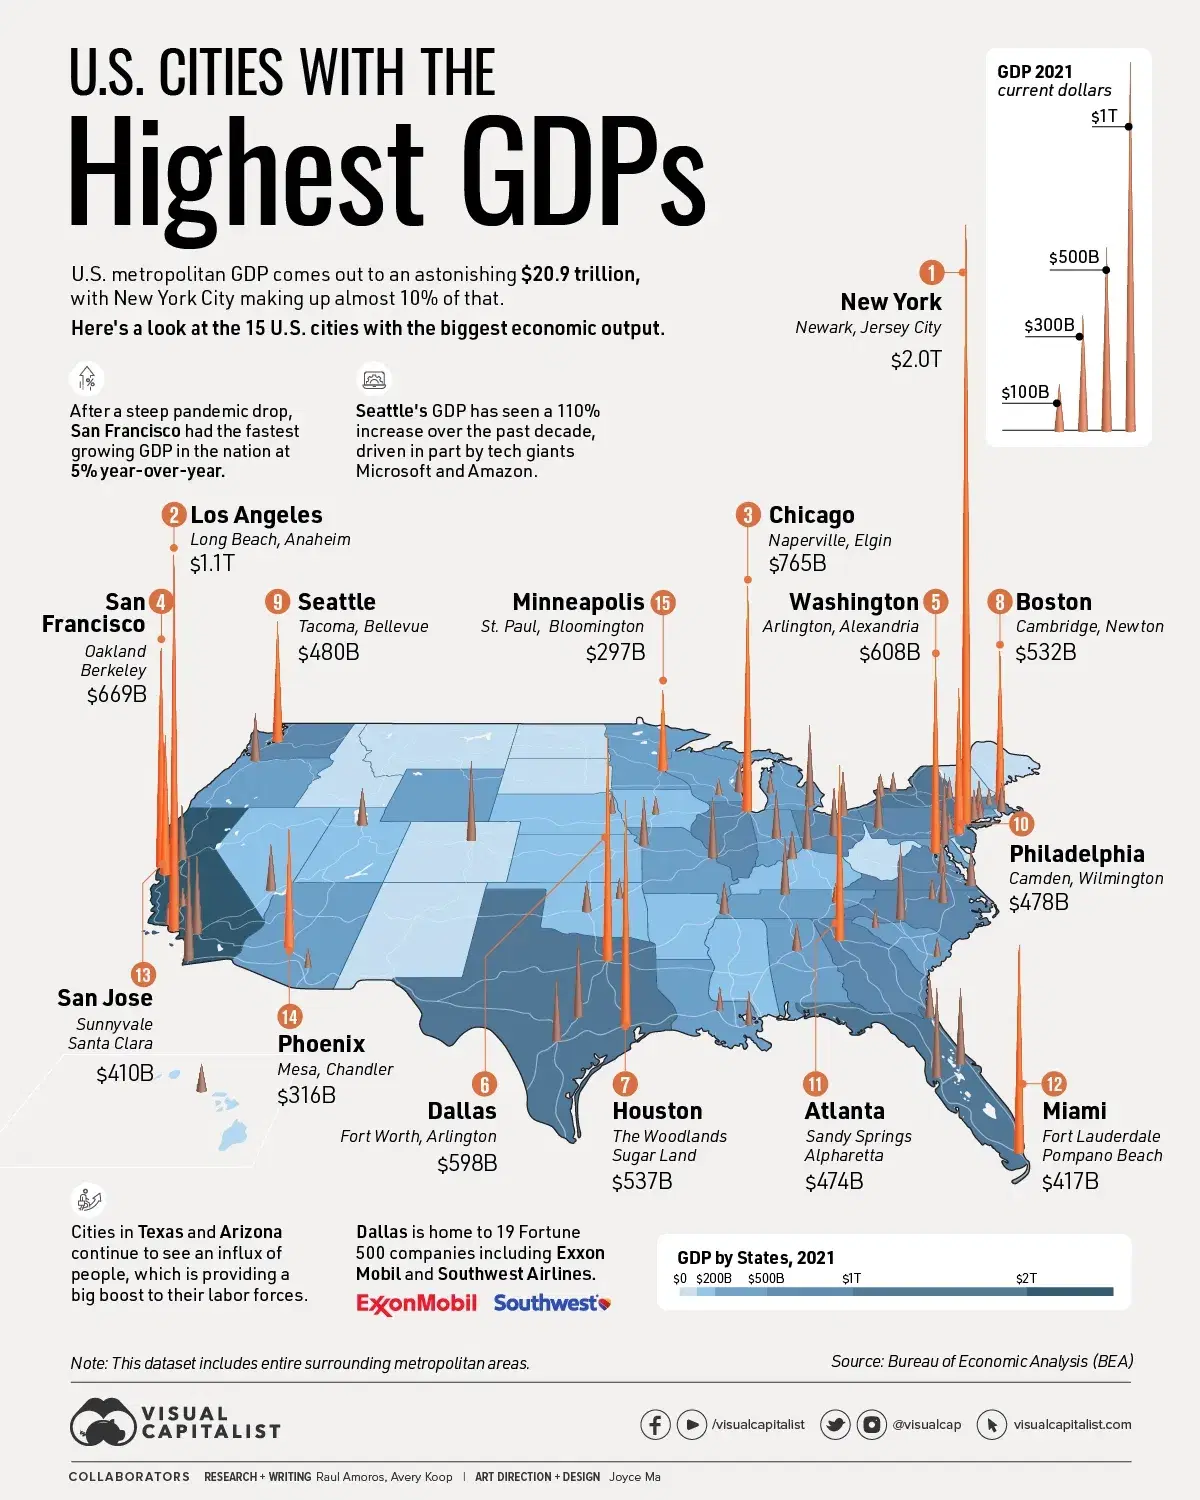 Mapped: The Largest 15 U.S. Cities by GDP